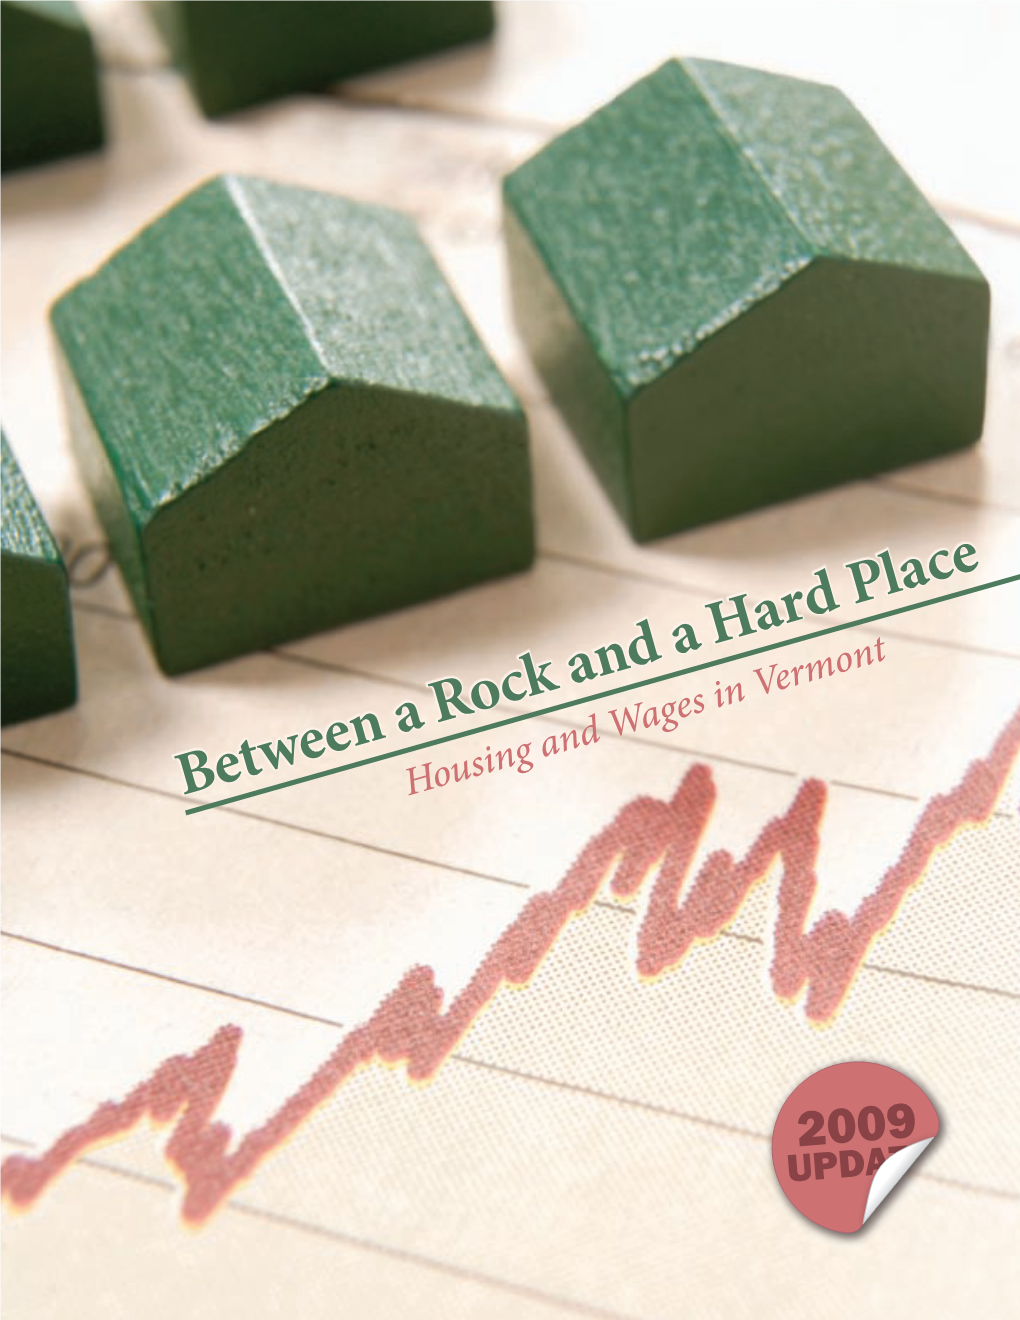 Between a Rock and a Hard Place: Housing and Wages in Vermont